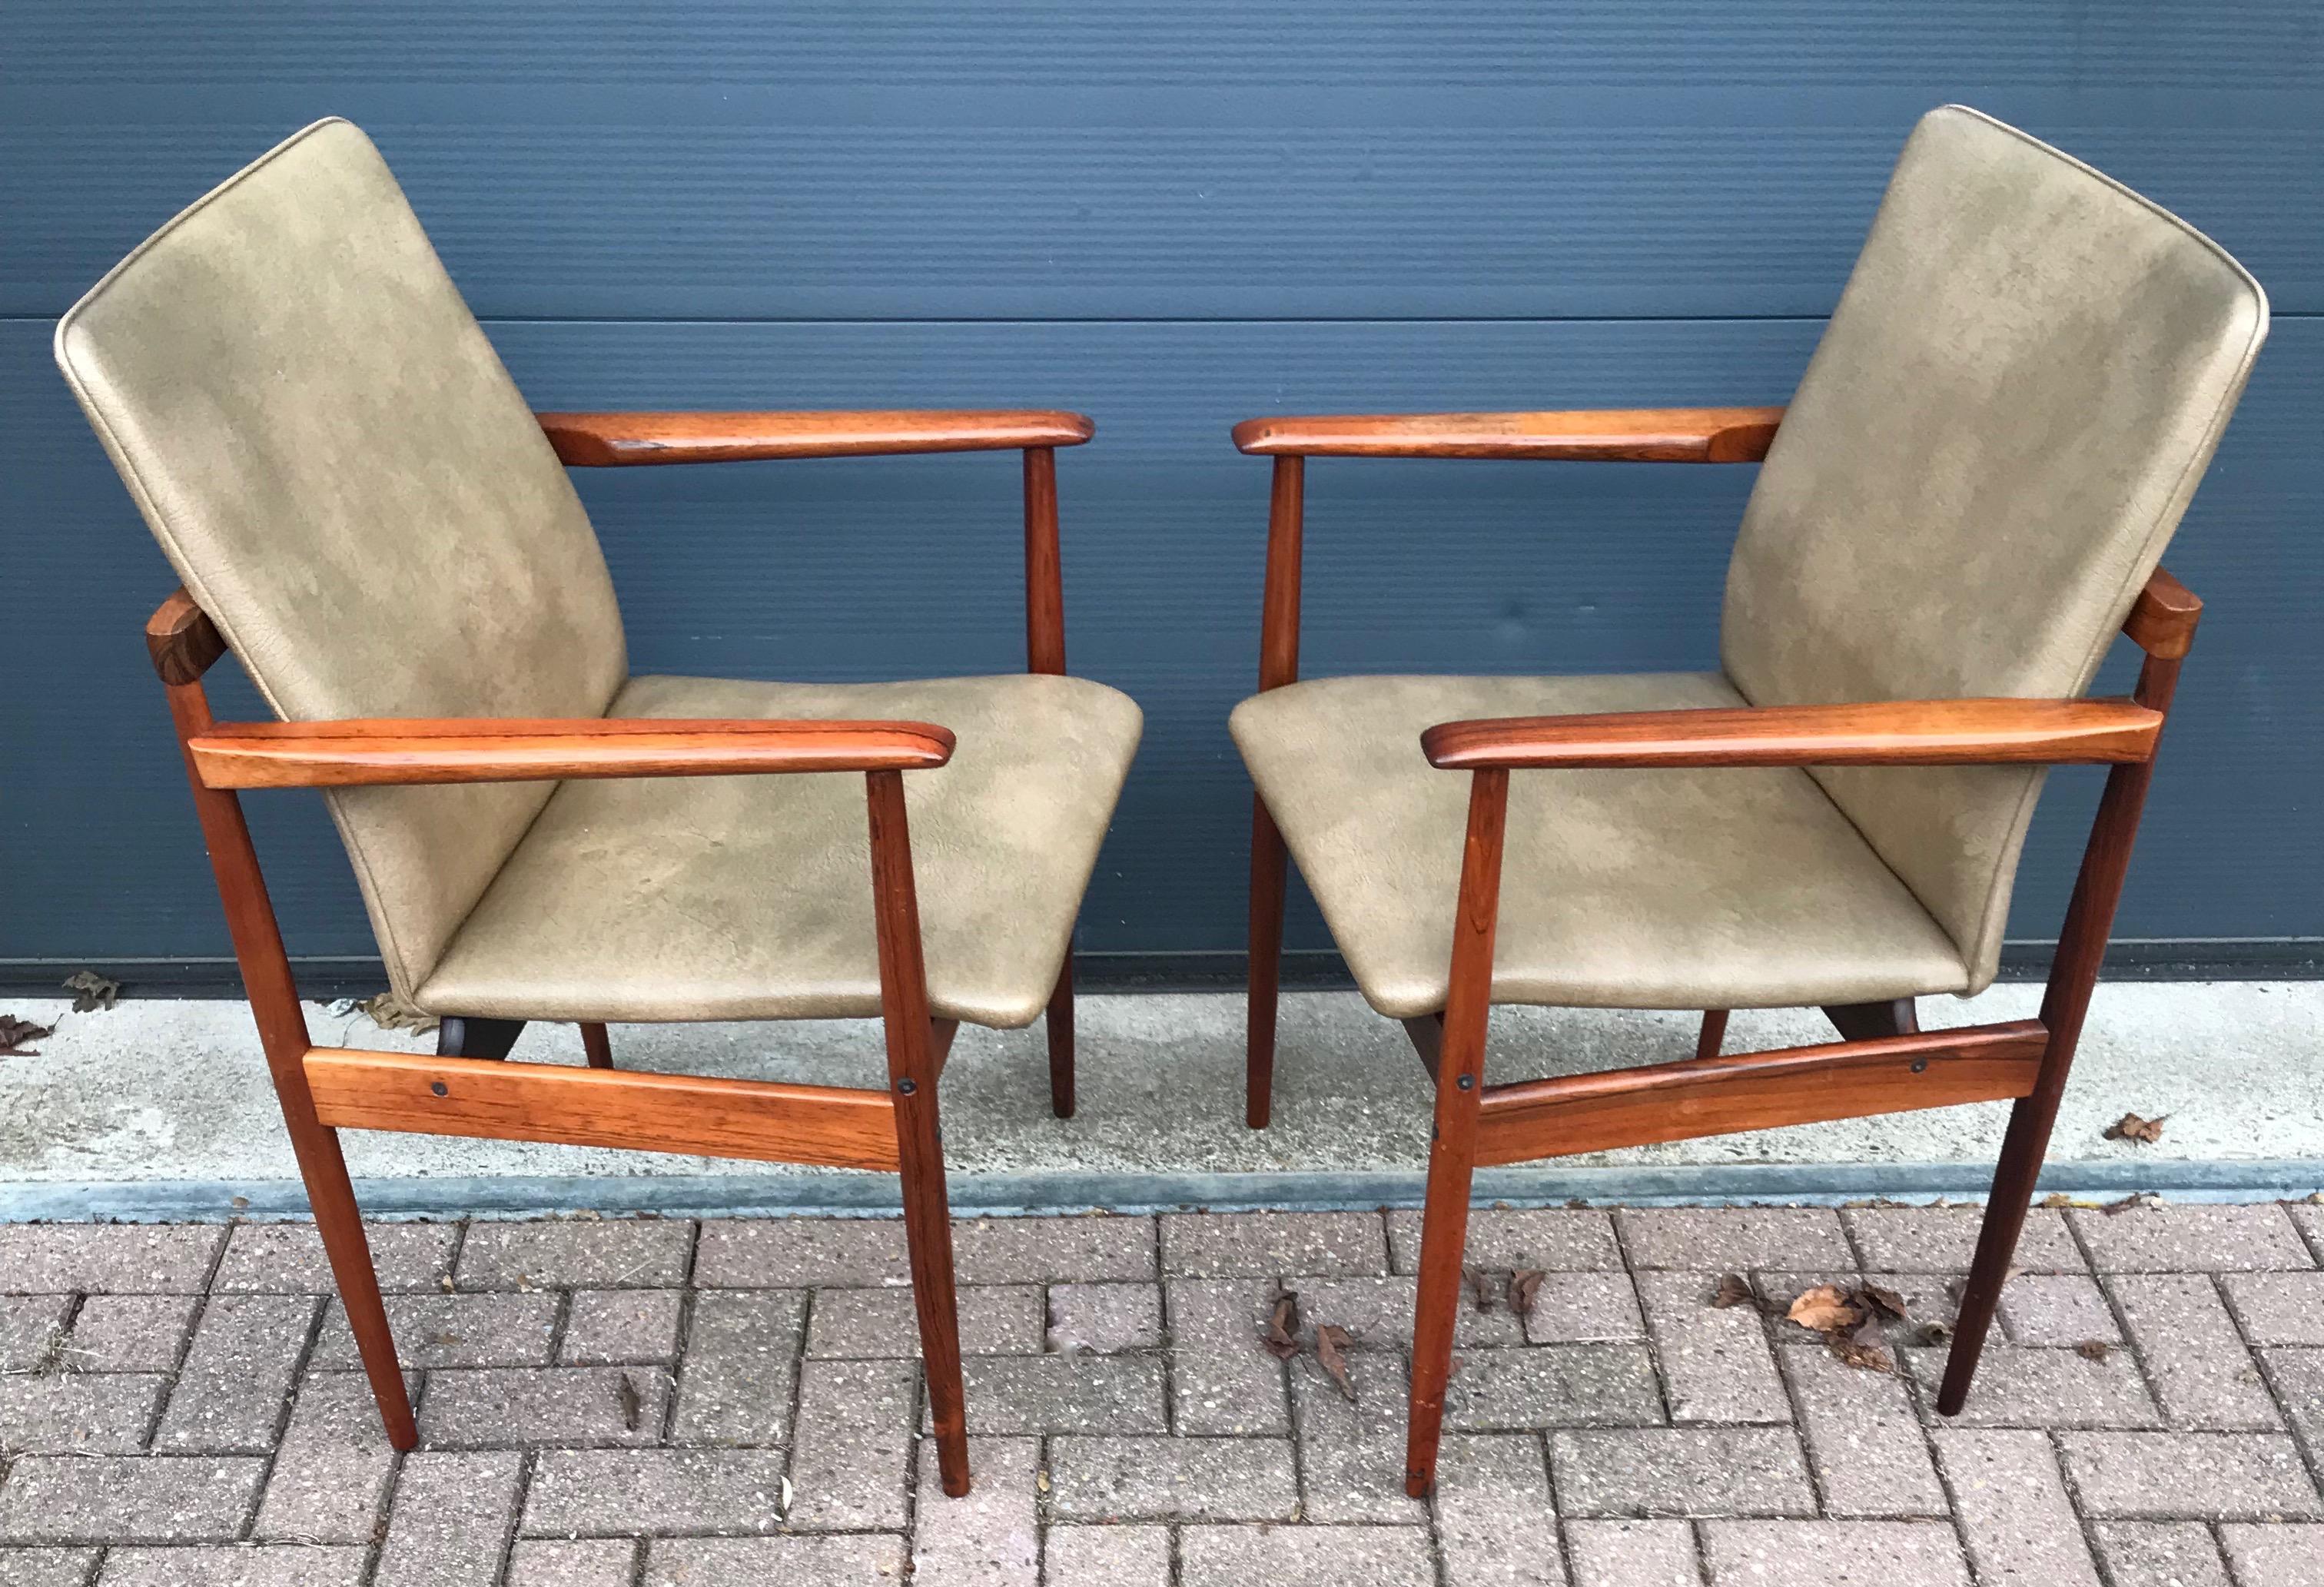 Beautiful design and amazing condition chairs.

The design and the look of these rare chairs reminded me of what someone once taught me about good sculptures, 